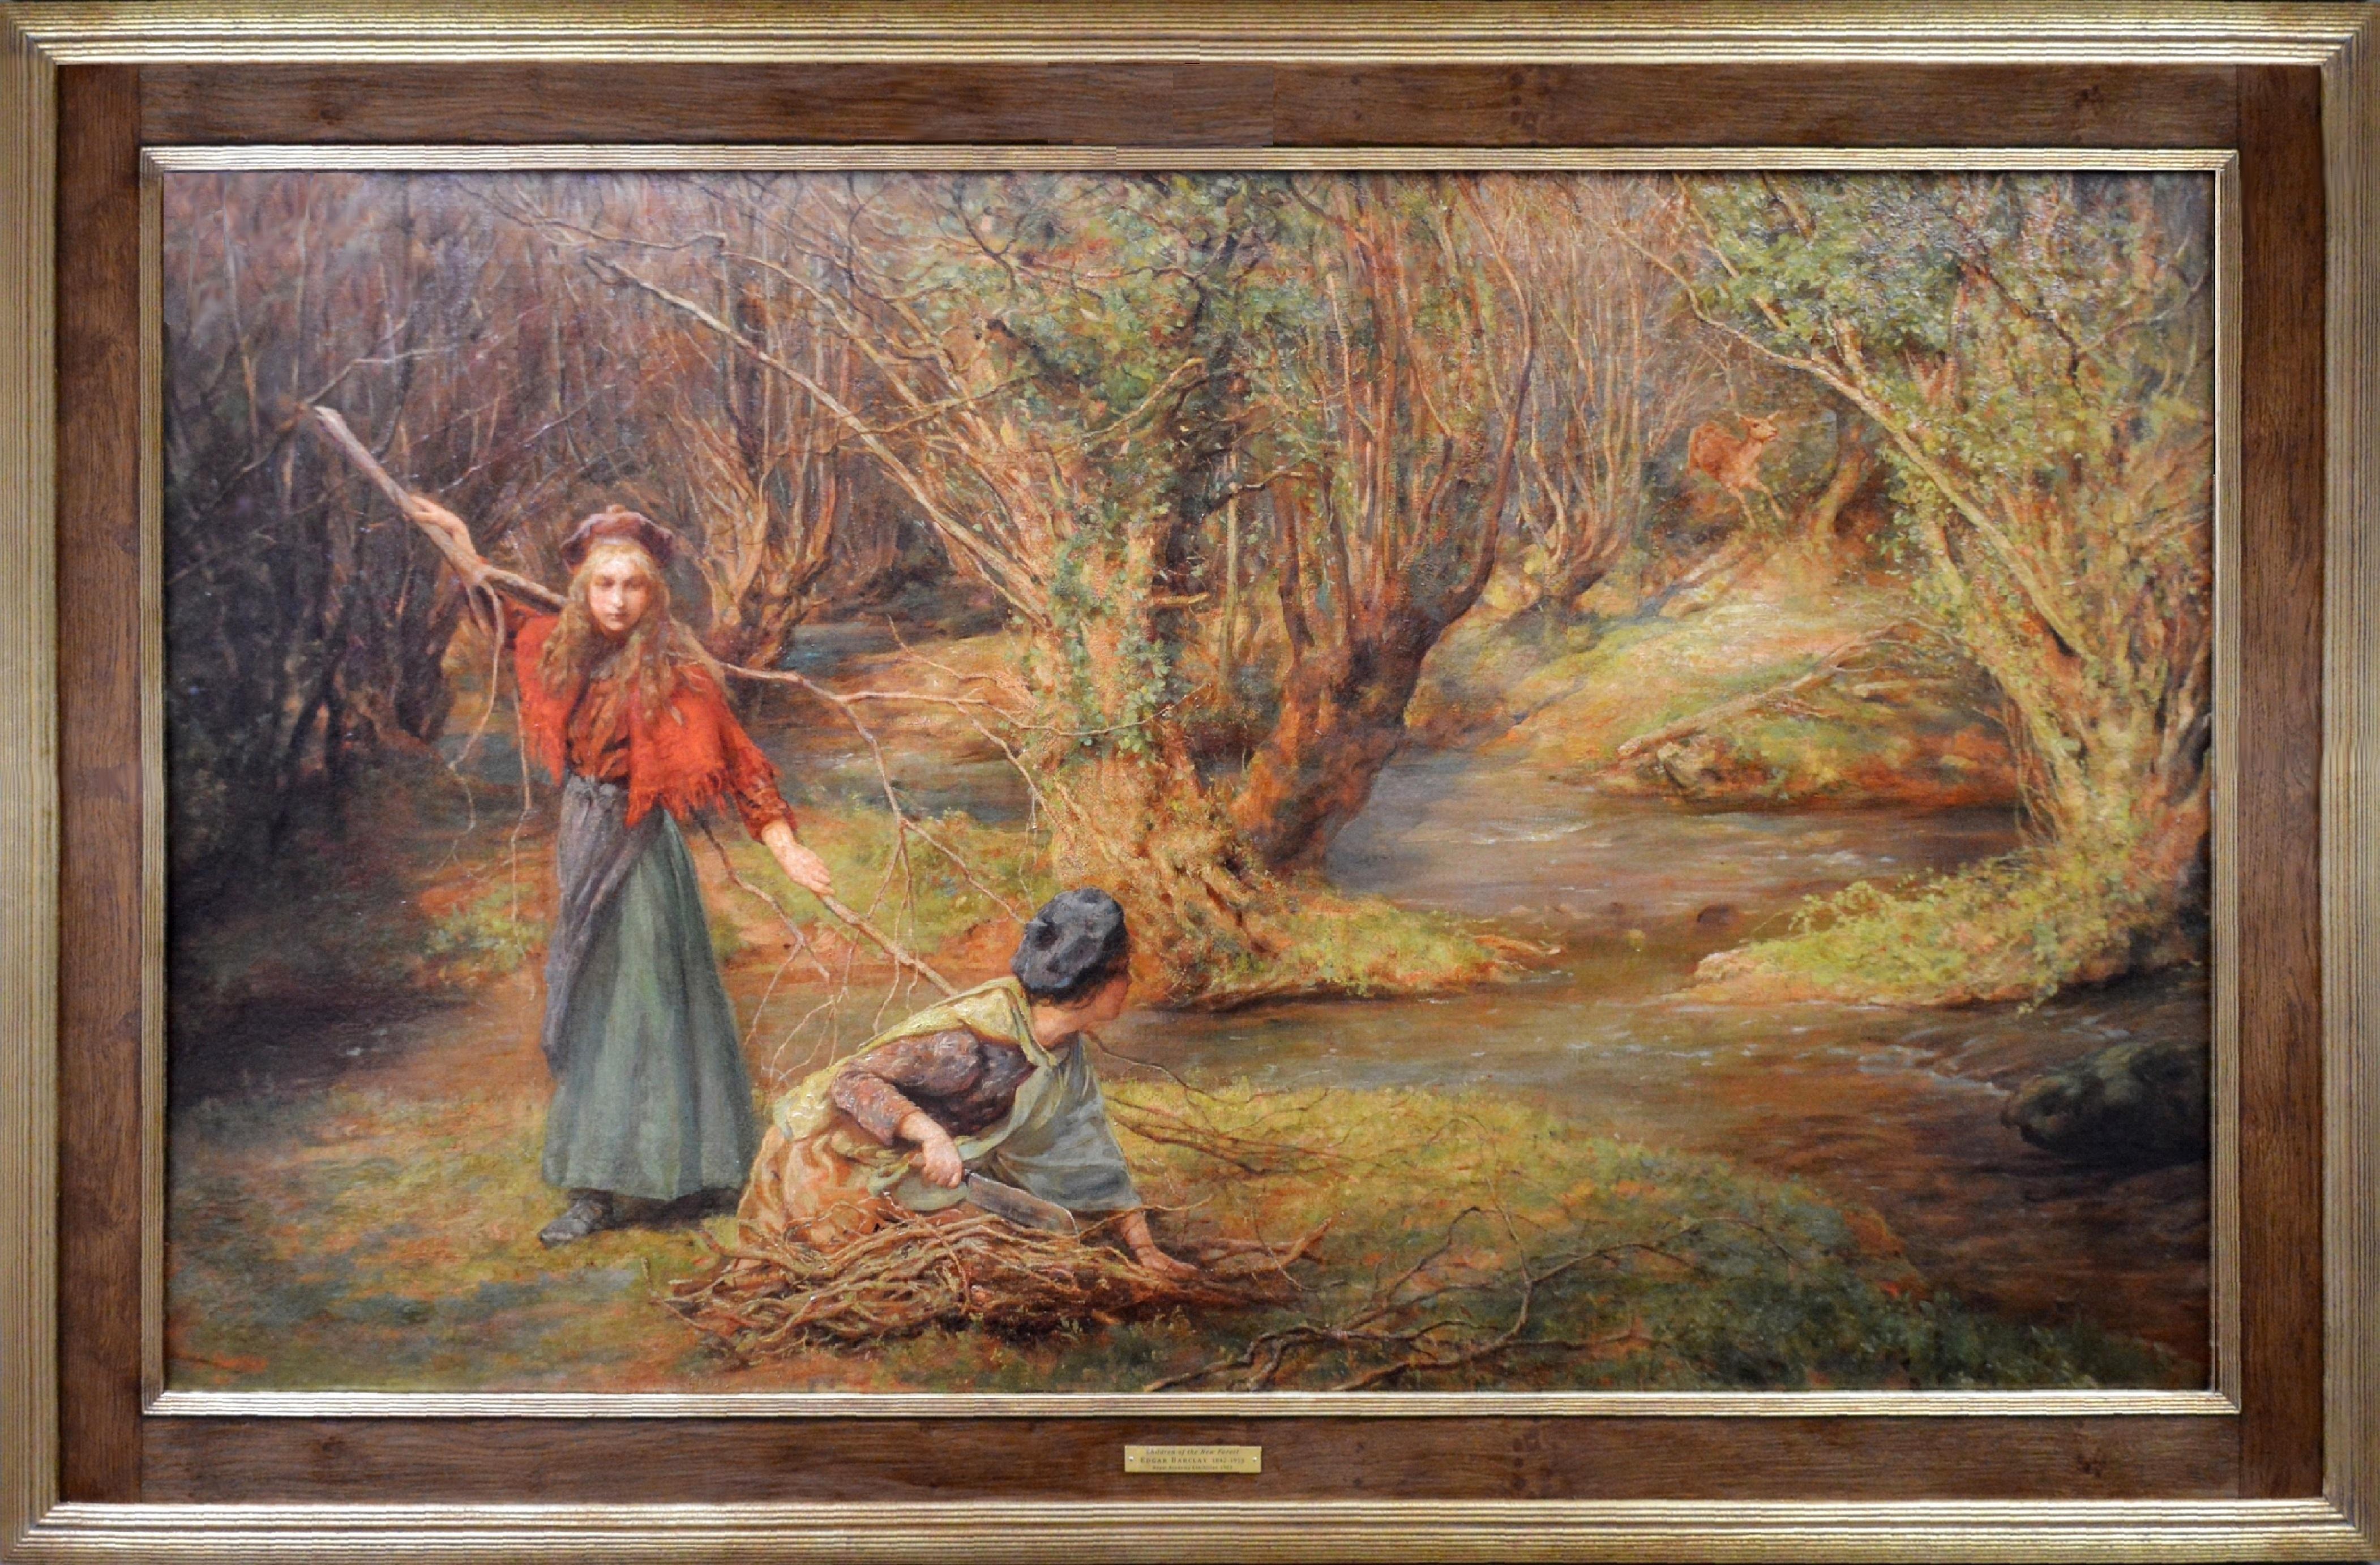 ‘Children of the New Forest’ by Edgar Barclay (1842-1913).
Depicting two girls gathering kindling in winter woodland, this very large painting is signed by the artist and was exhibited at the Royal Academy in 1901.

All our paintings are sold in the